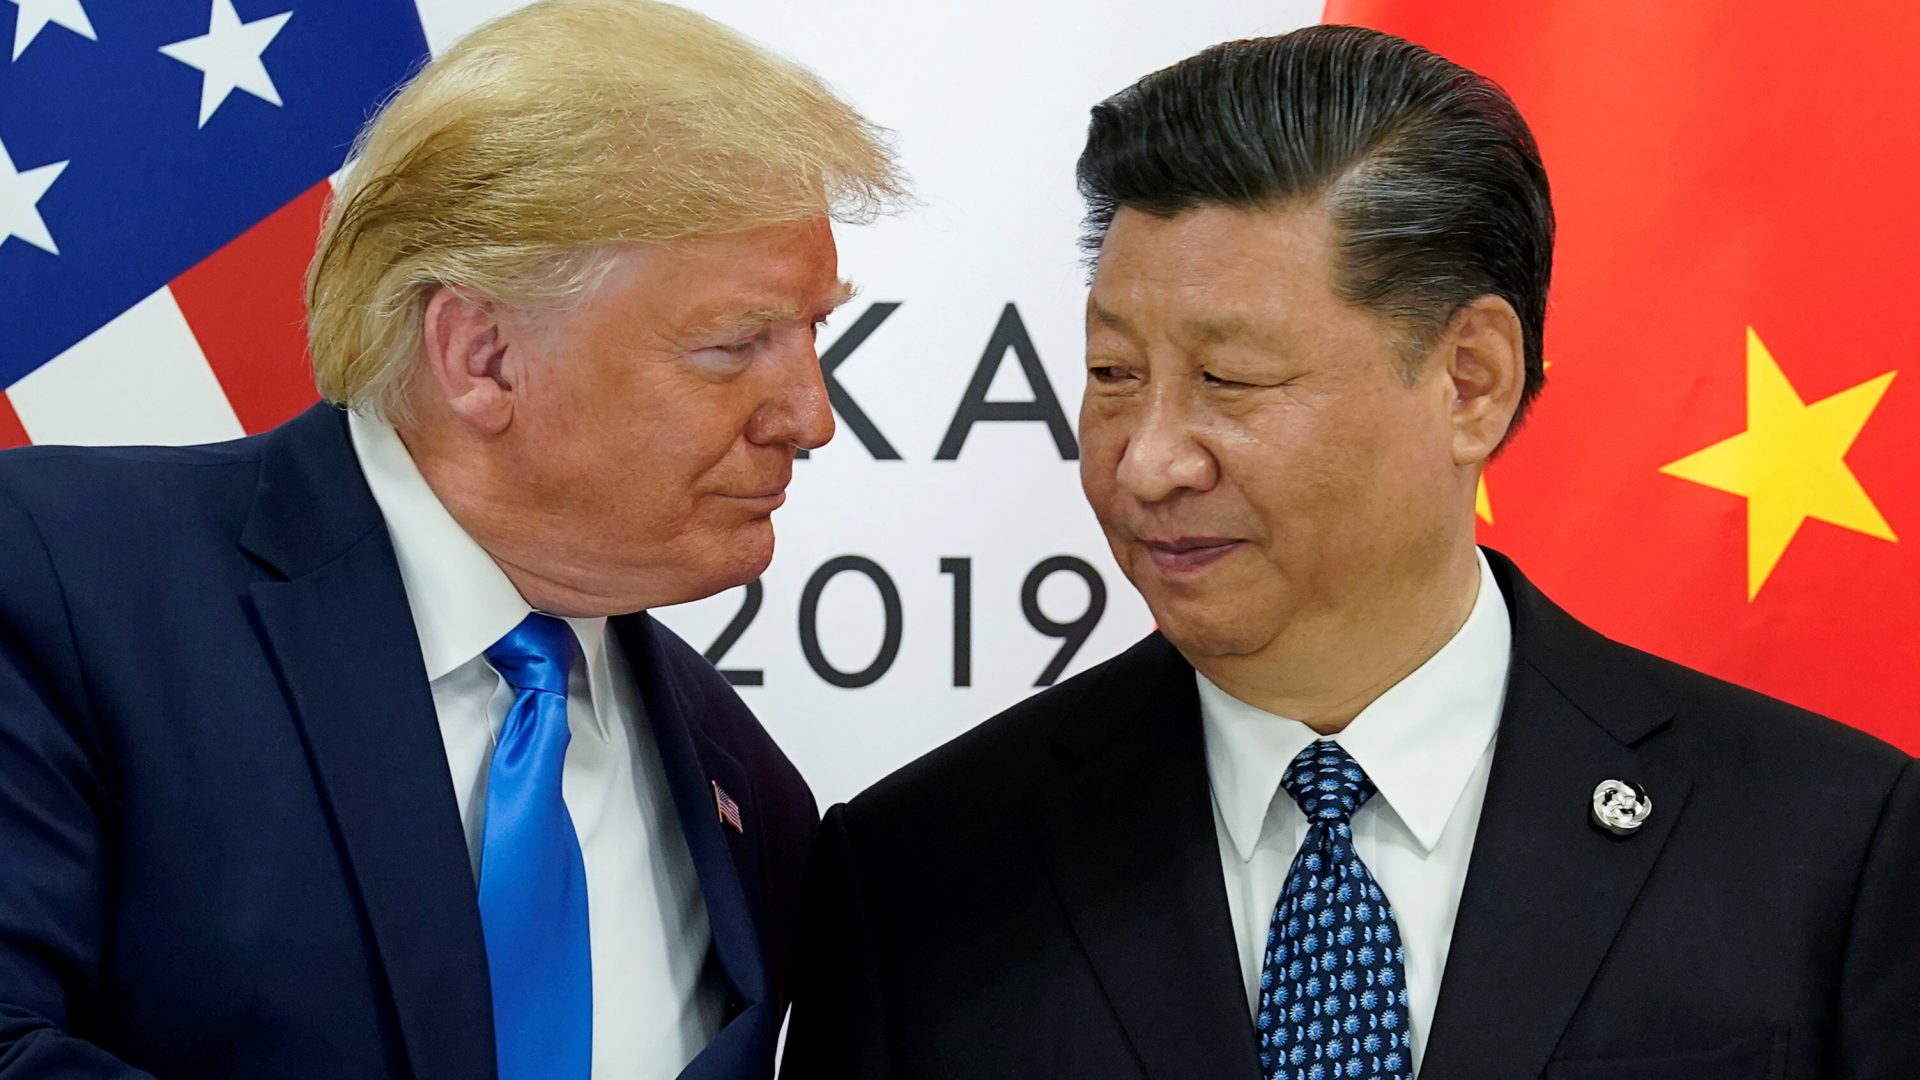 President Trump and China's President Xi Jinping, shown here in 2019, have both faced criticism for their handling of the coronavirus. Both leaders are now pushing hard for a vaccine. The U.S. has already agreed to pay a drug company more than $1 billion to produce a vaccine that's yet to be approved. Xi says if China succeeds in developing a vaccine, it will be declared 